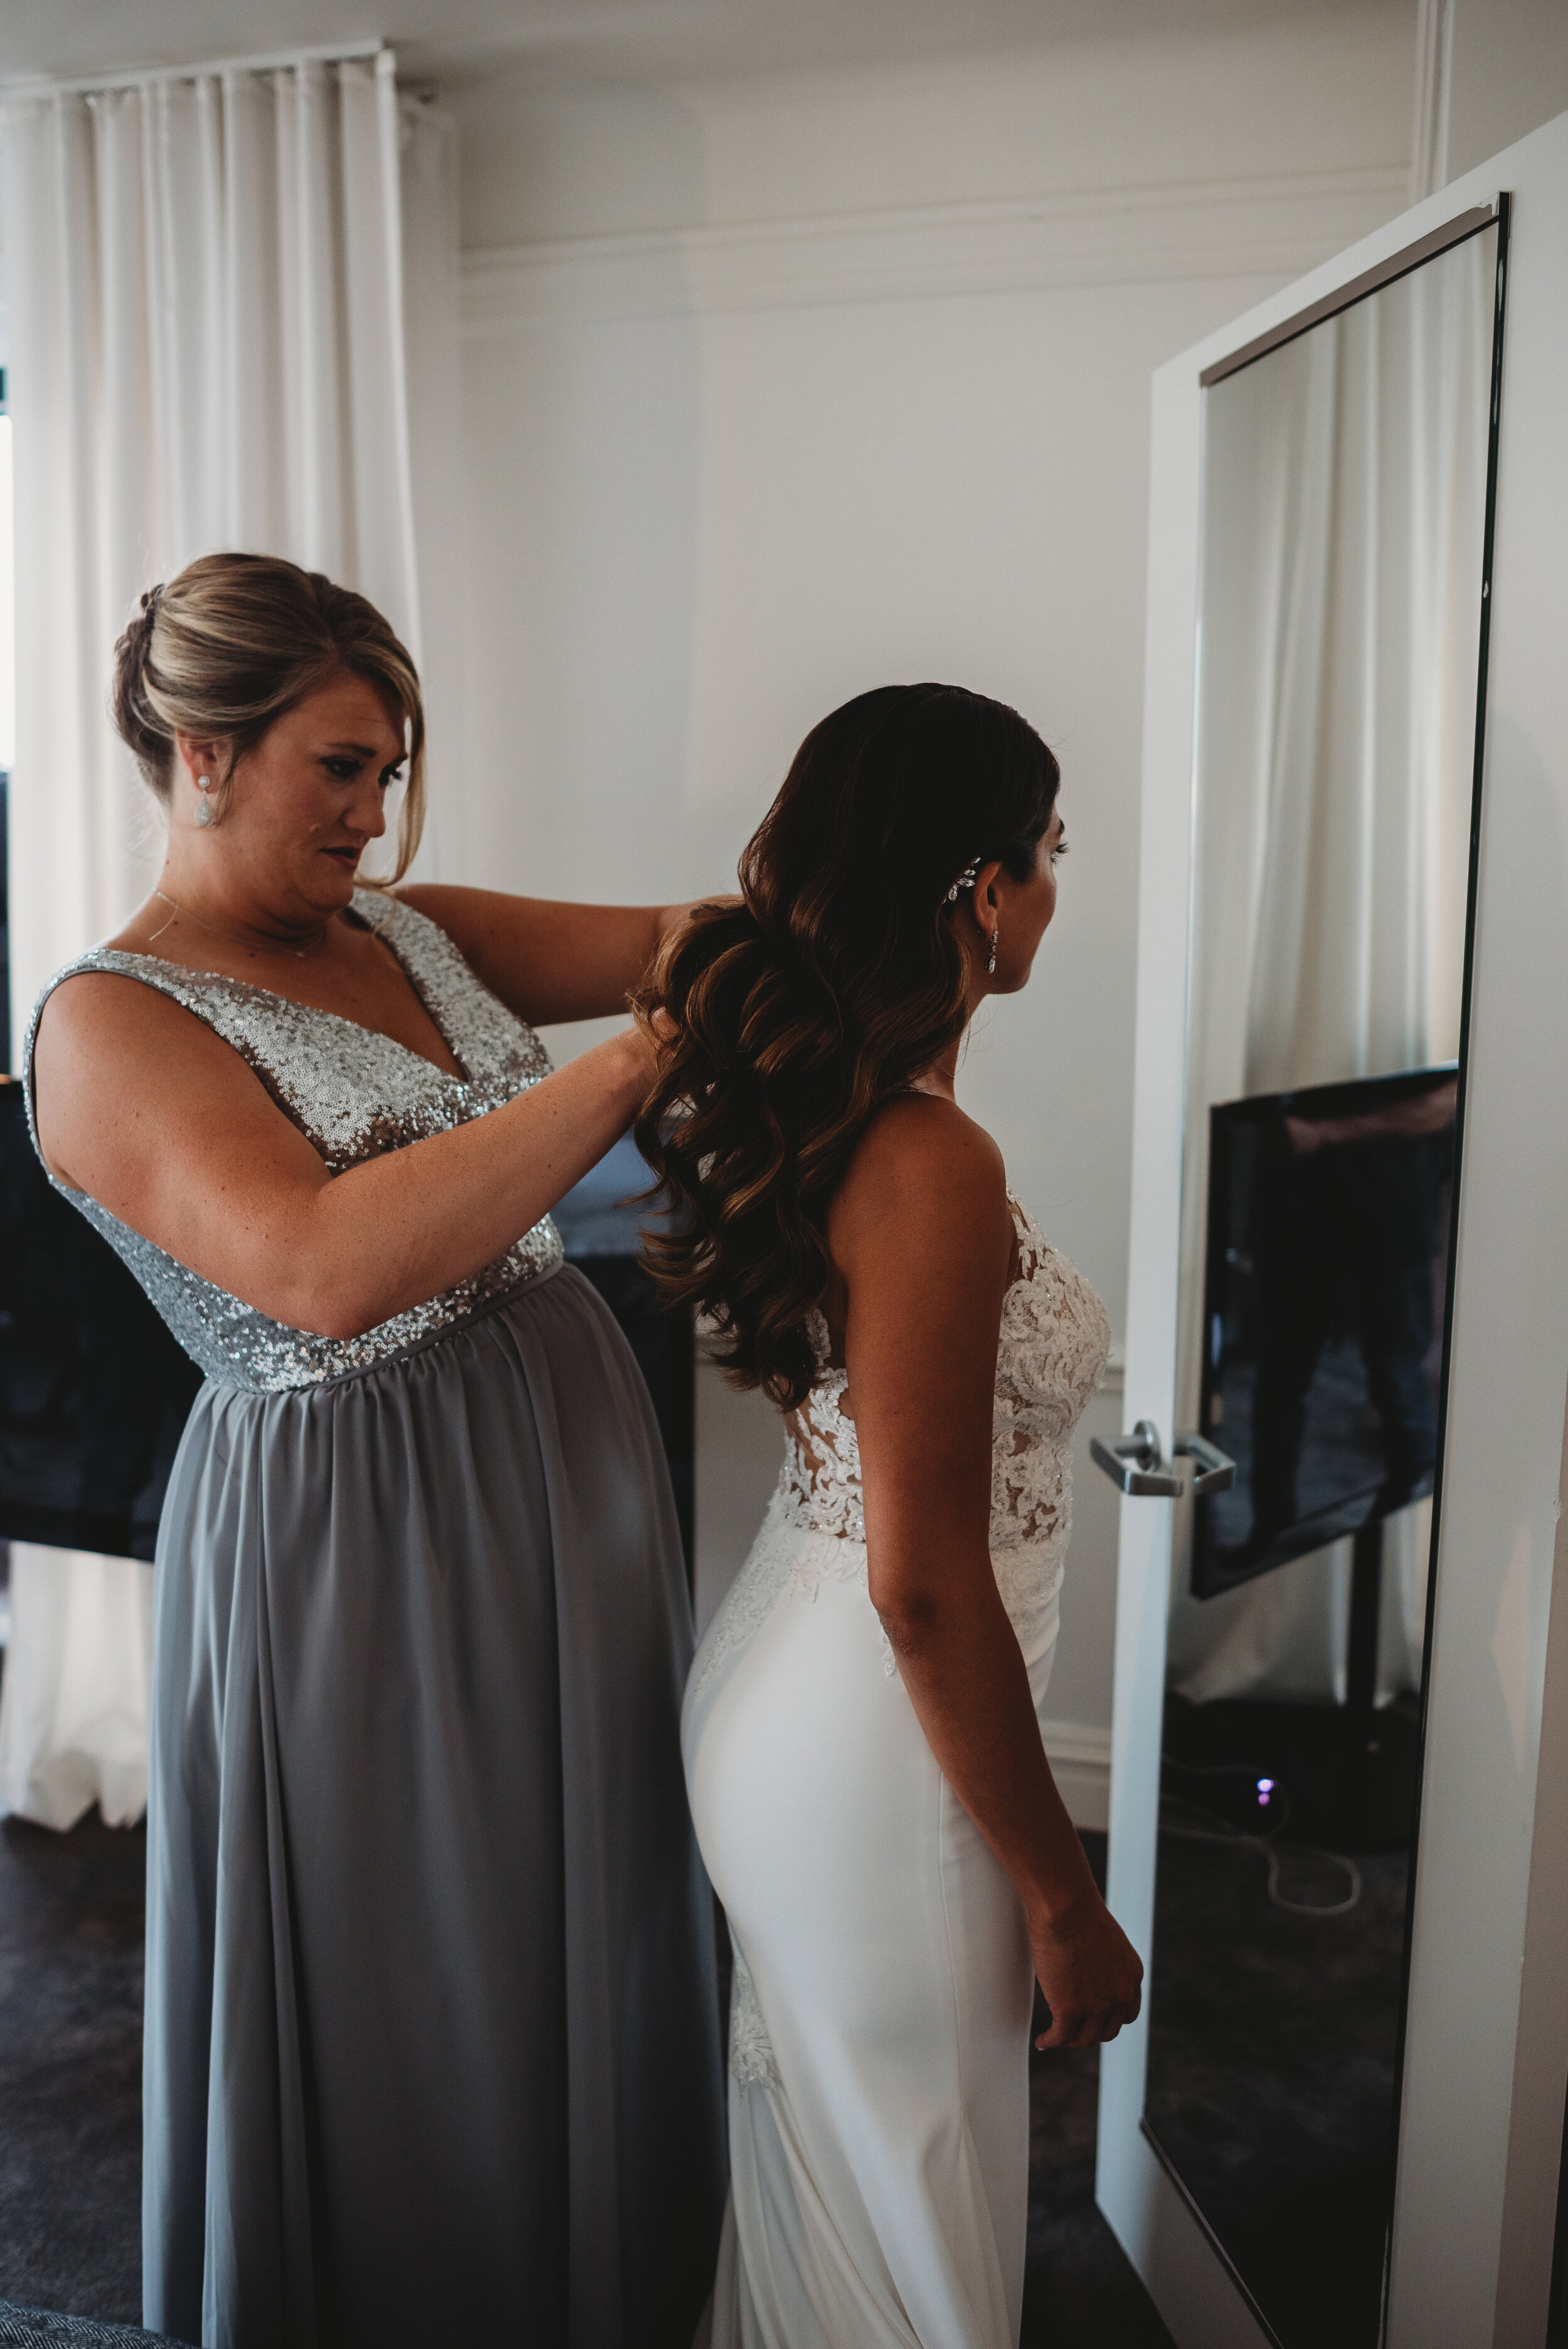 Bride getting ready: Modern Chic Chicago History Museum Wedding captured by Girl with the Tattoos. See more wedding ideas at CHItheeWED.com!